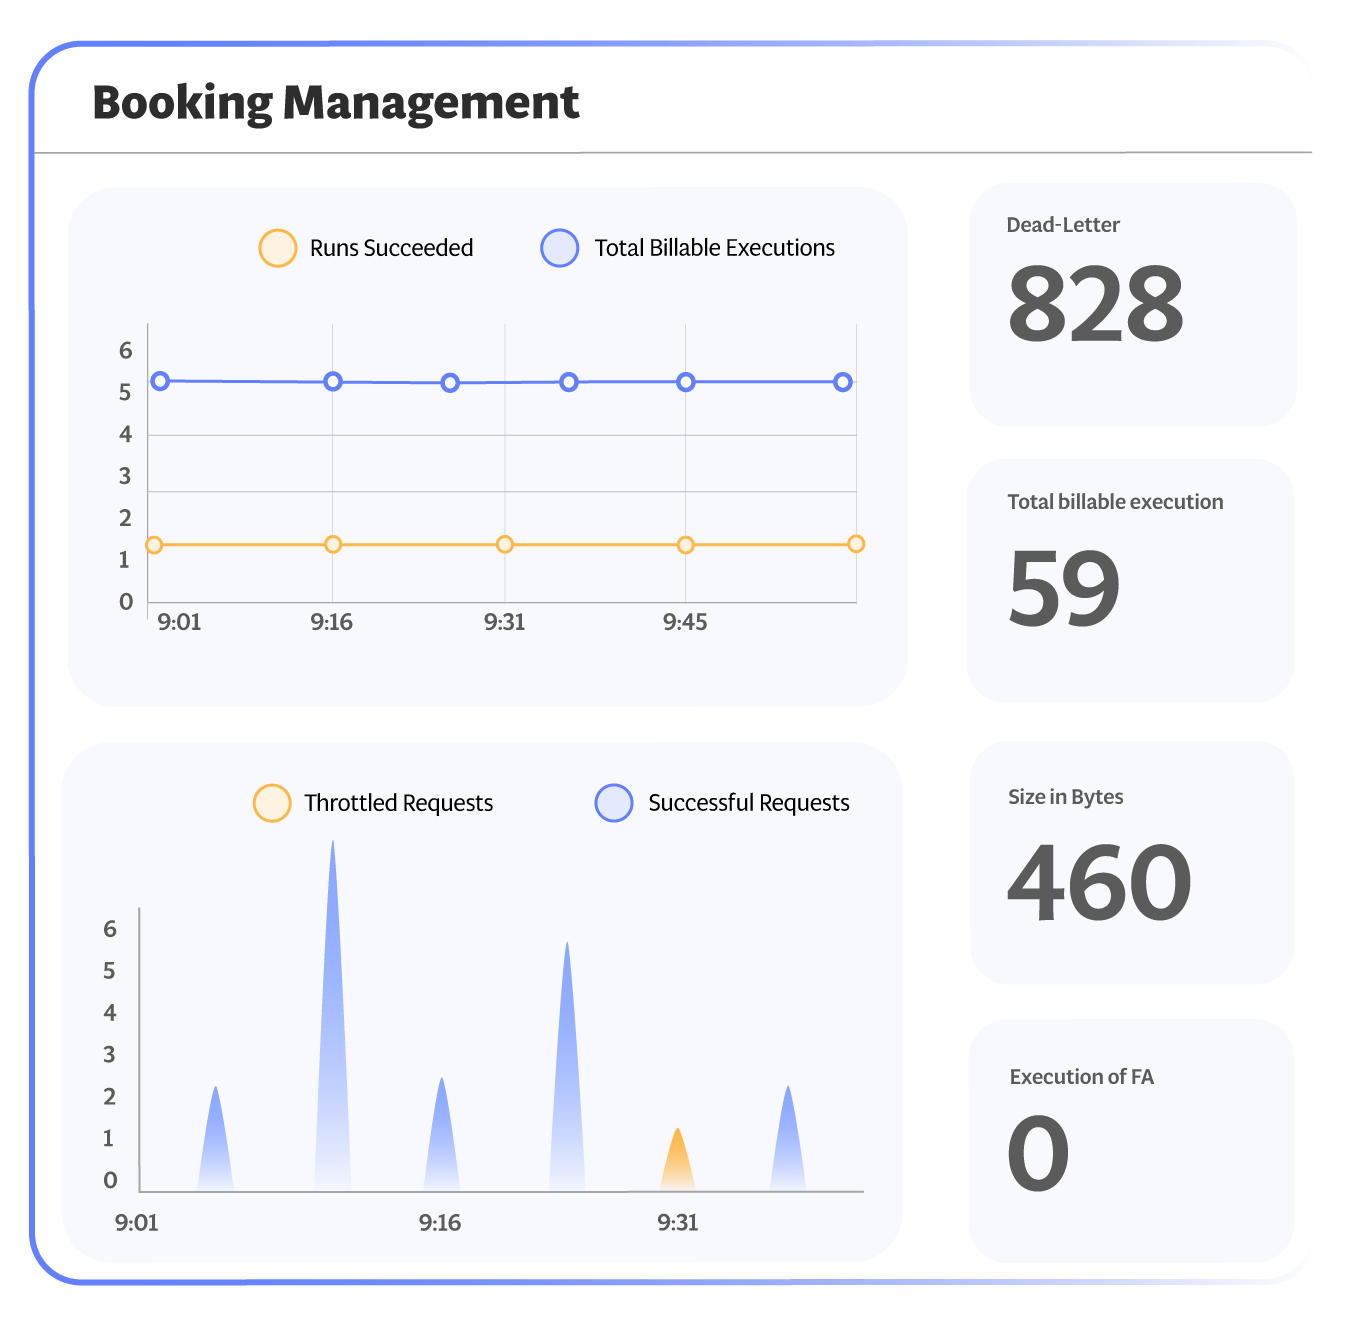 Customized Dashboards for Booking